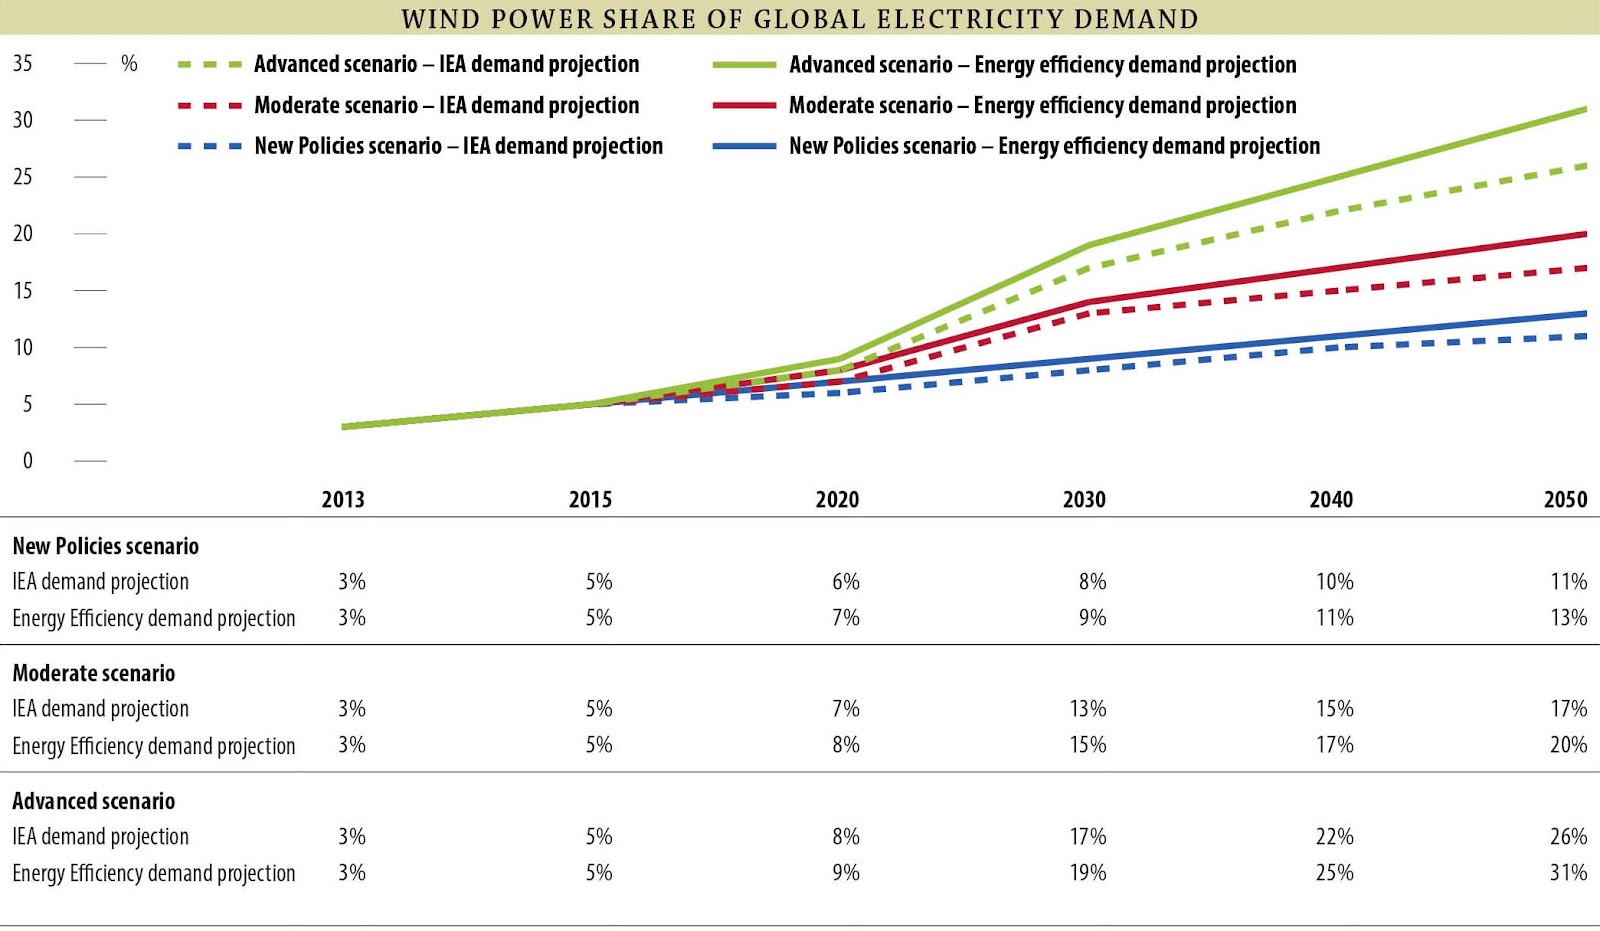 5_Wind-Power-share-of-global-electricity-demand.jpg